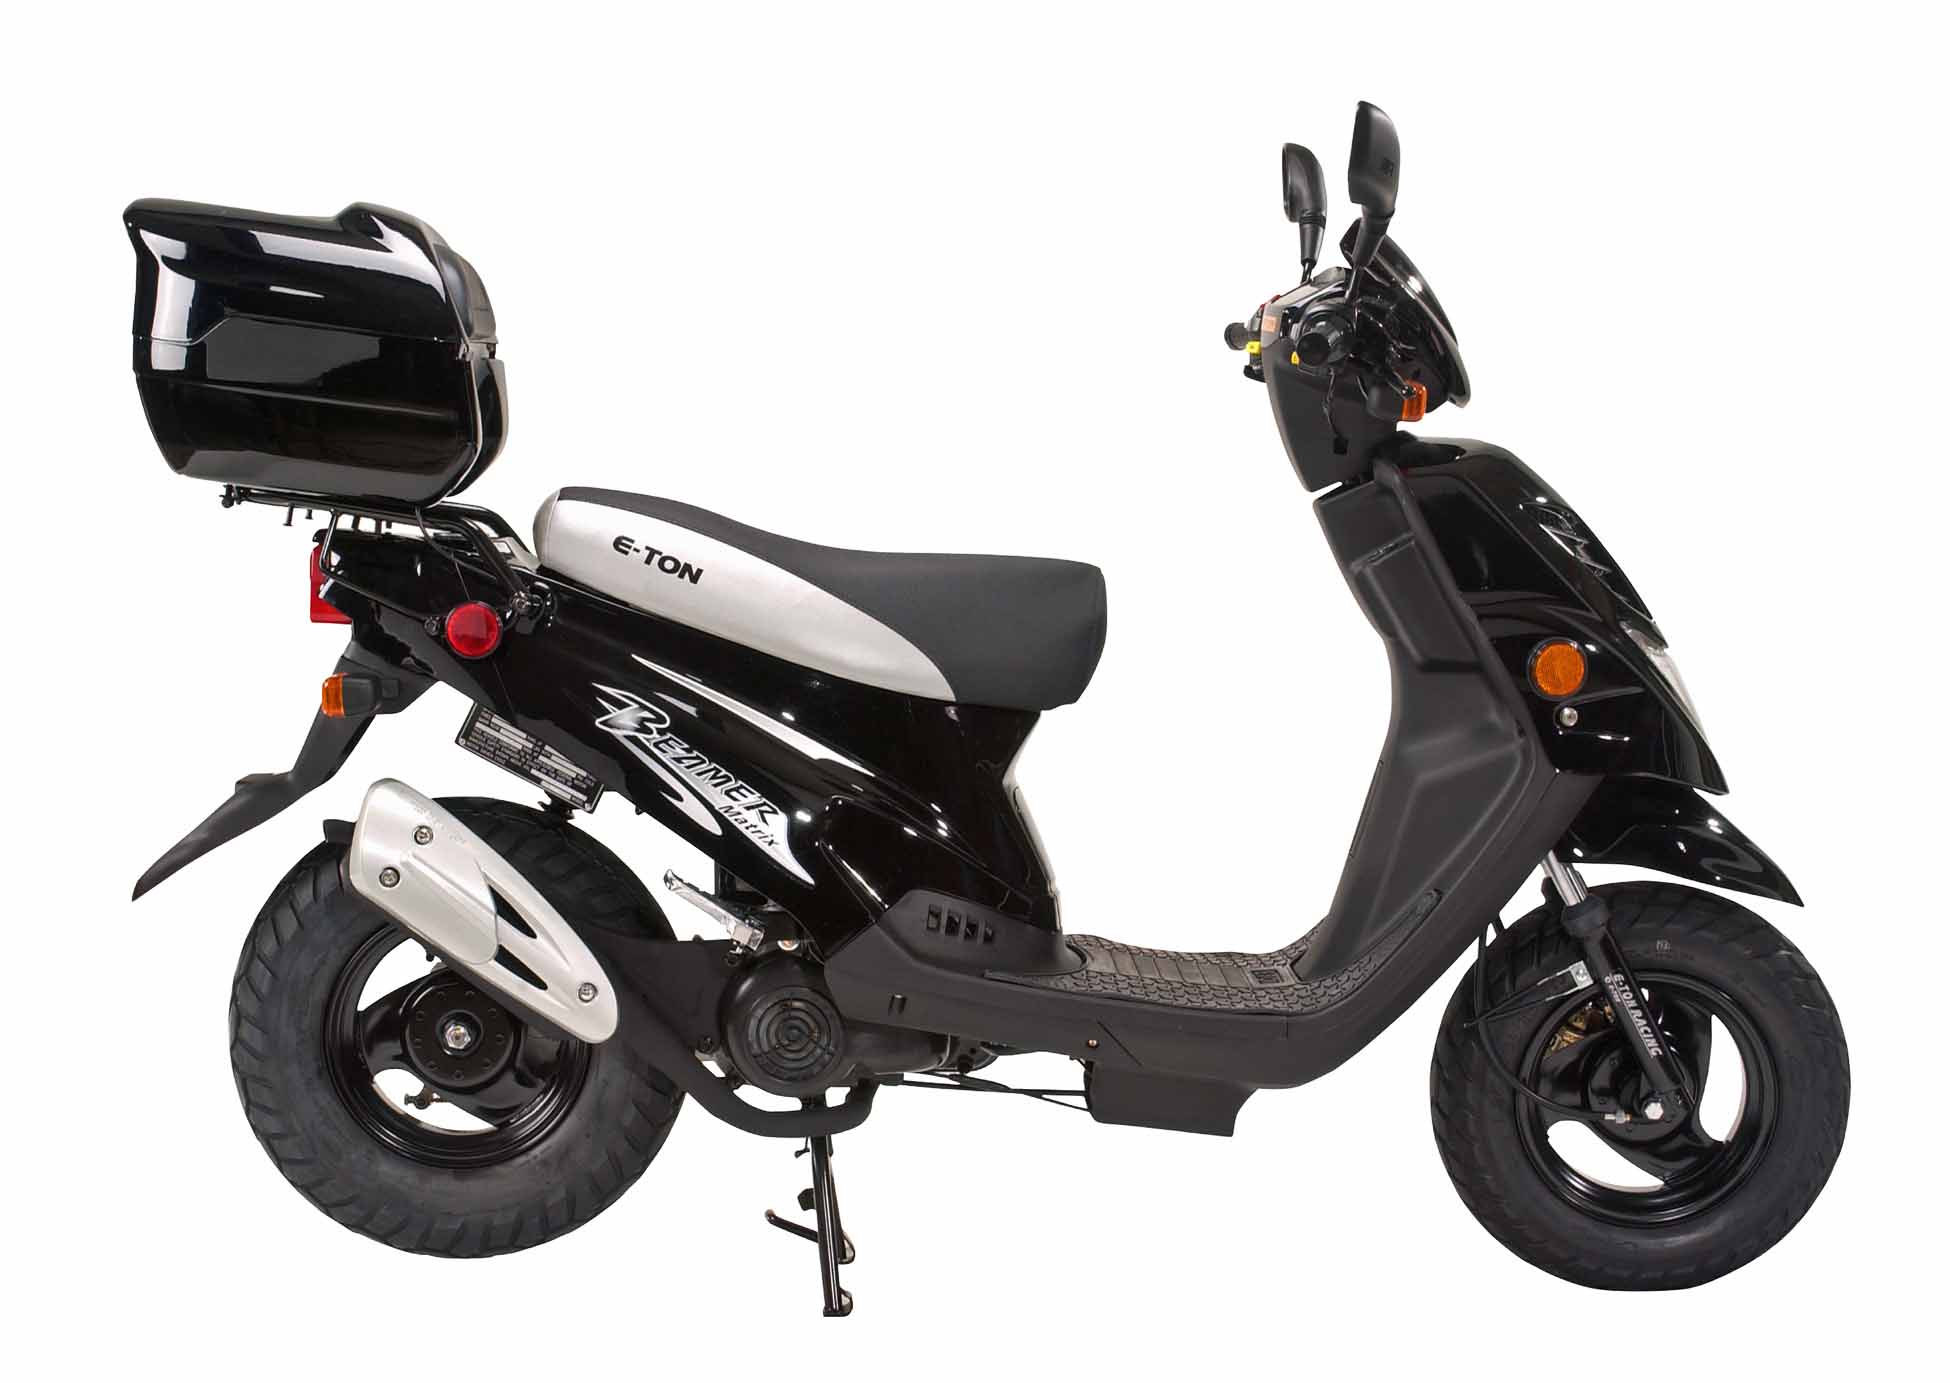 E-Ton Beamer 50, a scooter from the early 2000s #1